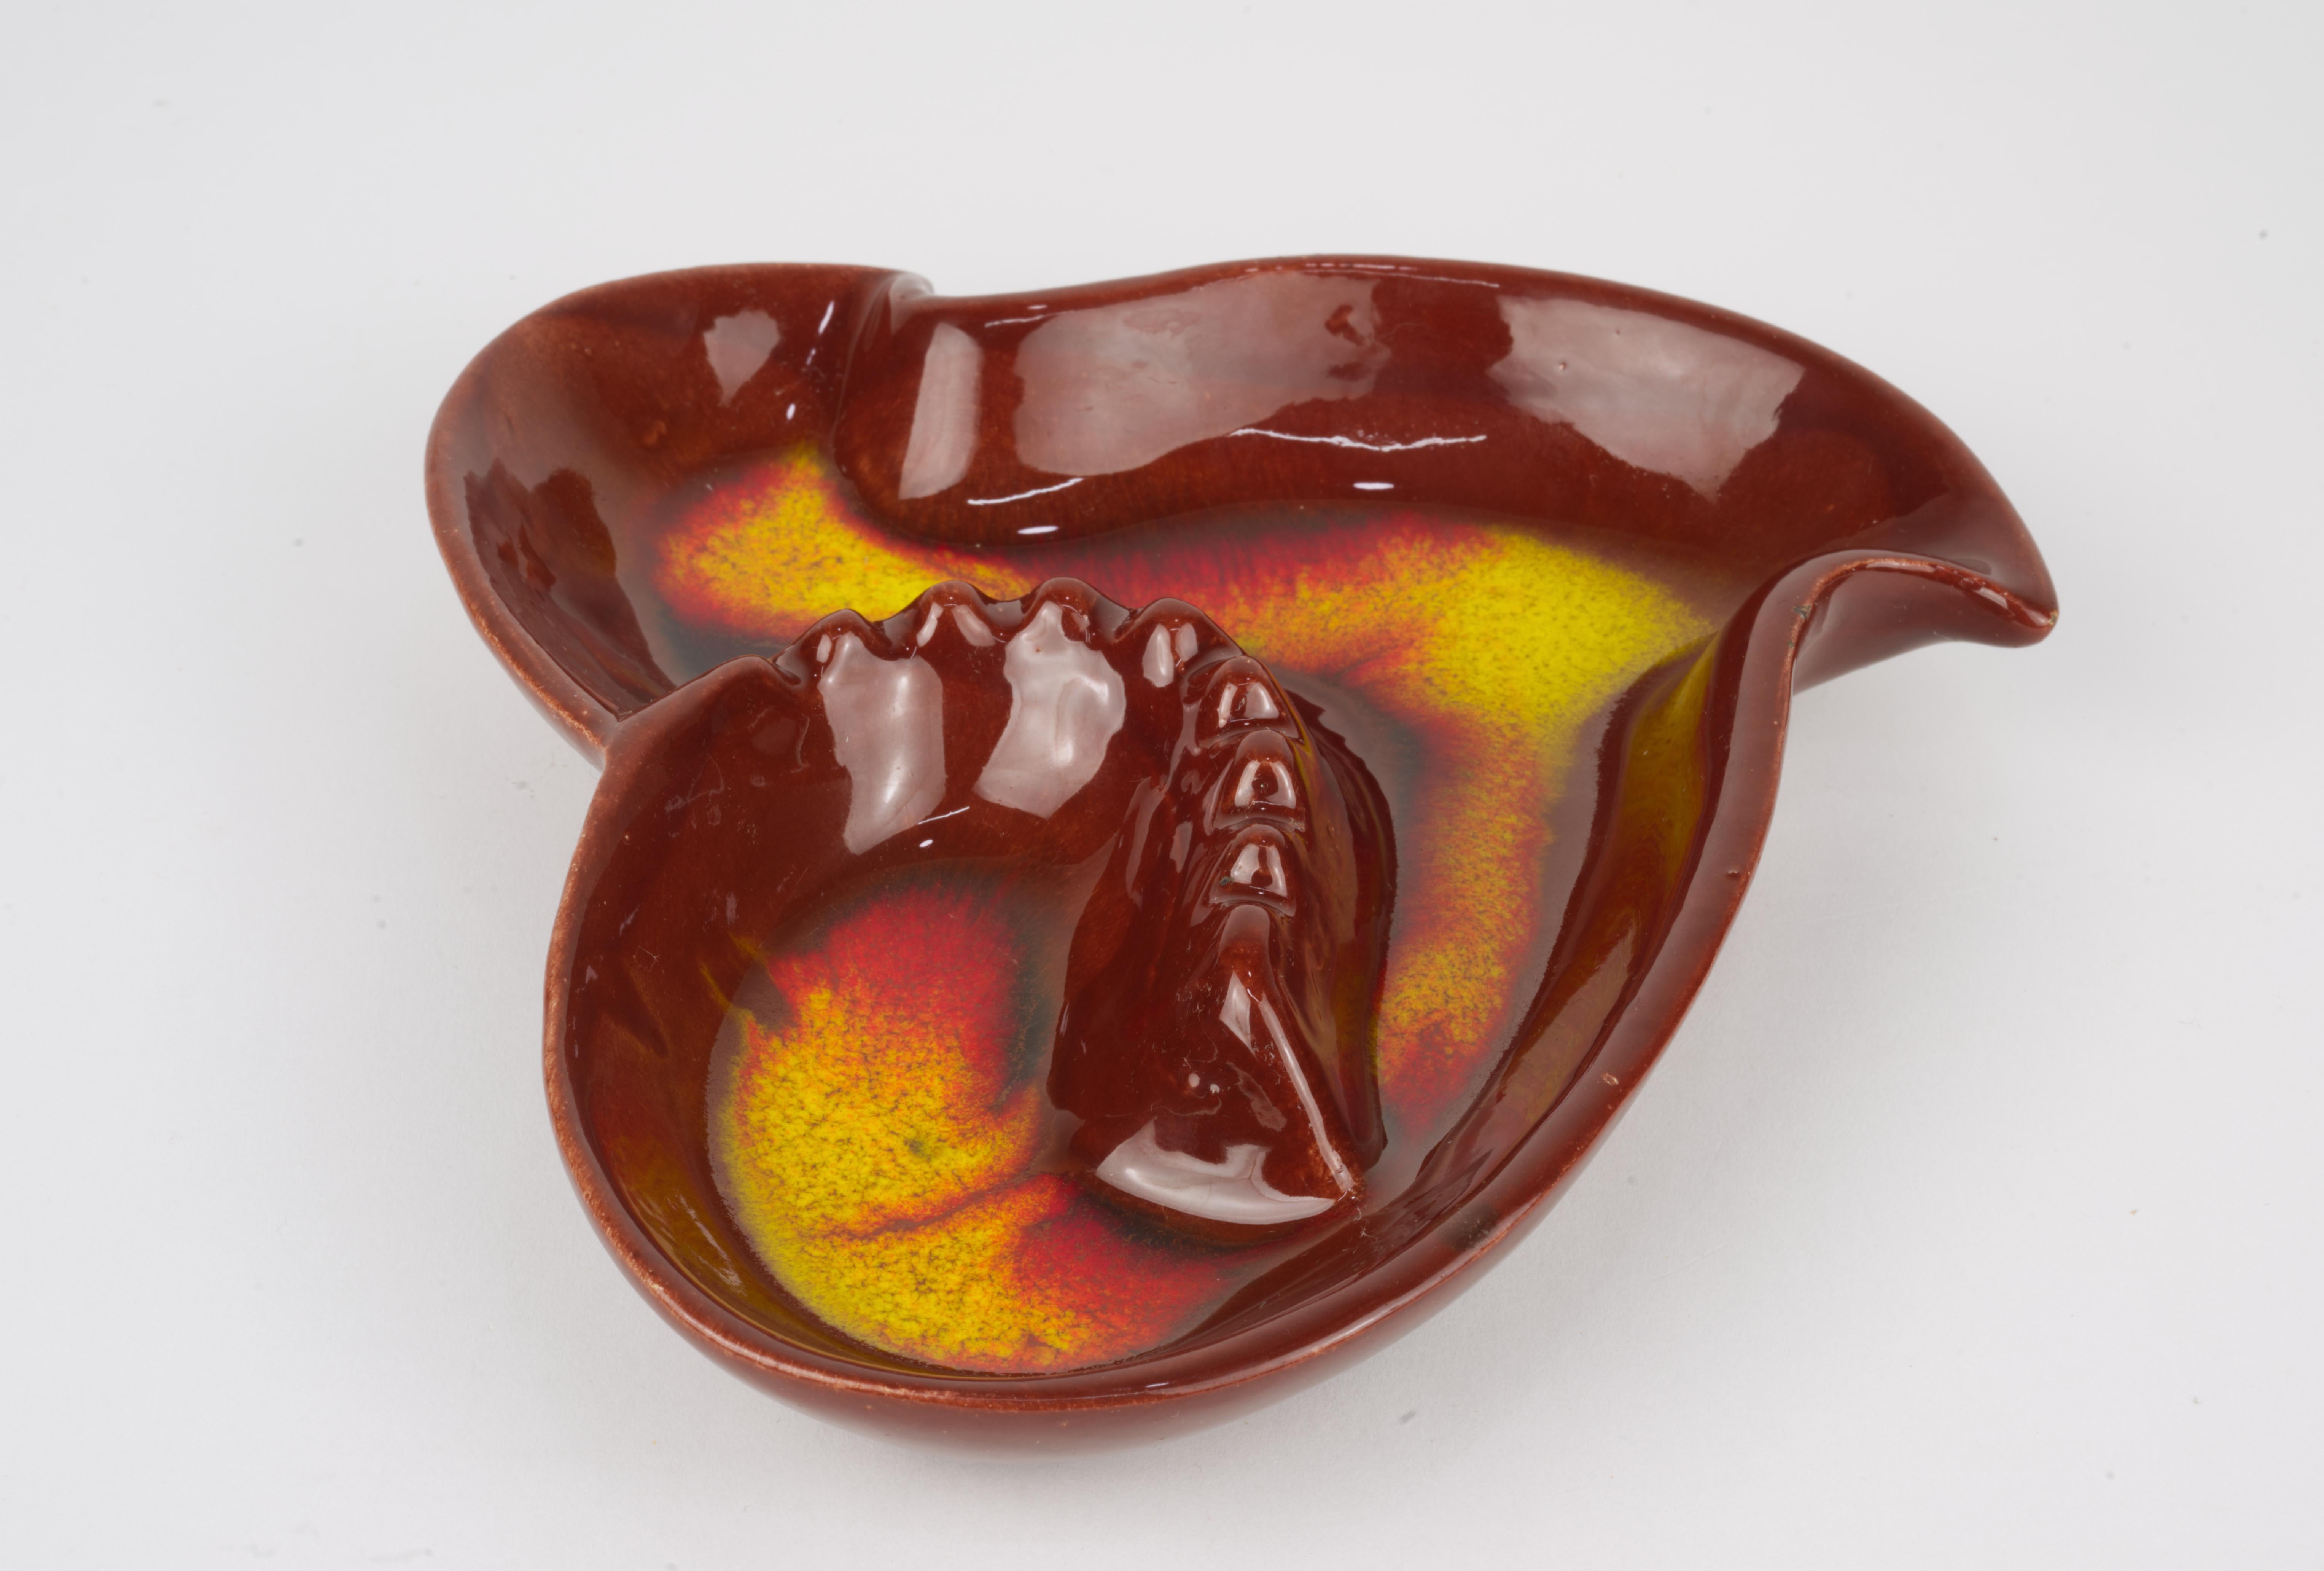  Large vintage ceramic ashtray in retro bright orange, red, and yellow colors was made by one of California art studio potteries in 1950s - 1960s. It has an organic, asymmetrical sculptural shape with smoke rest center.

The ashtray is signed on the